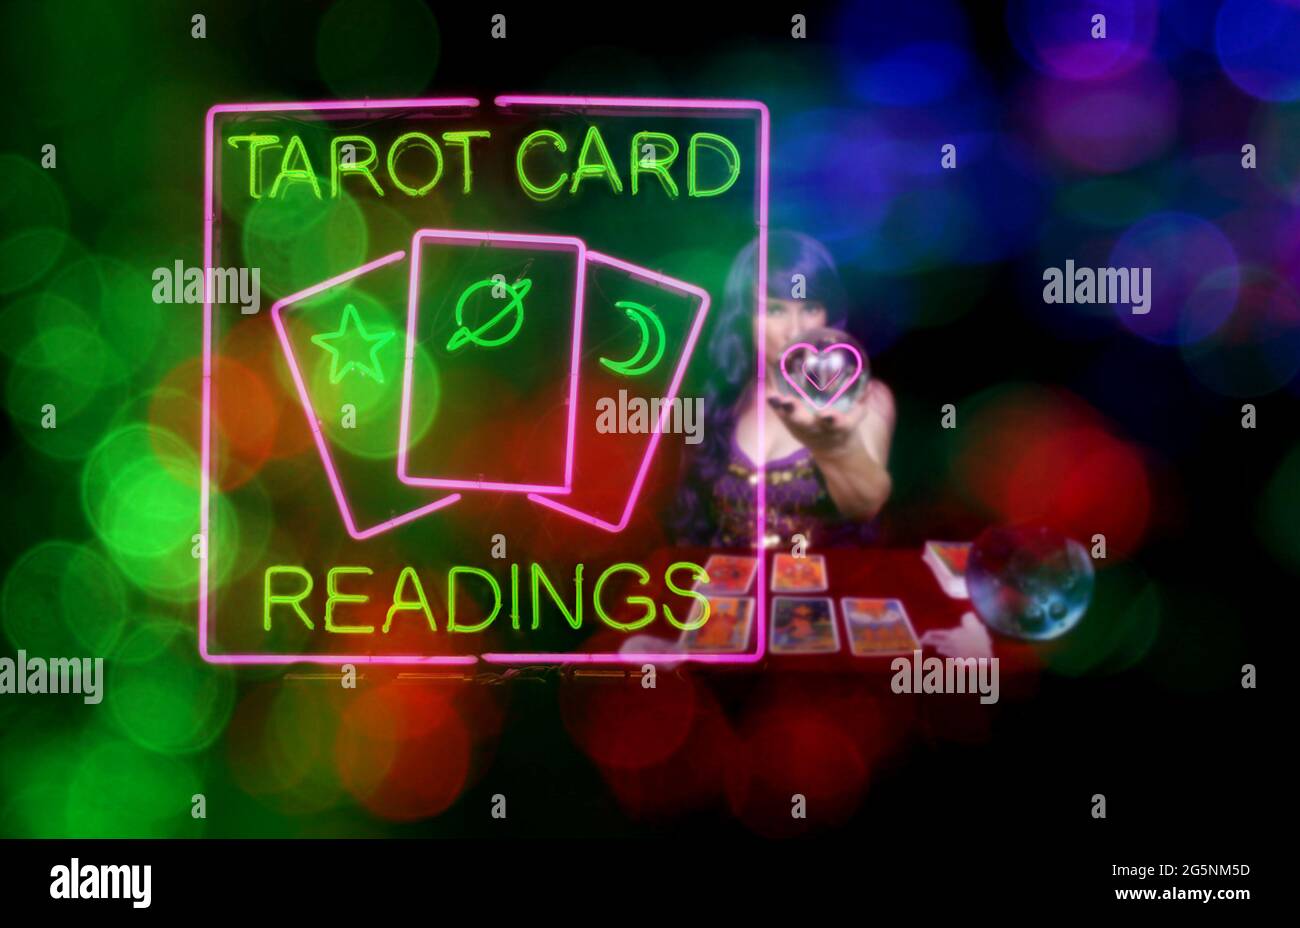 Tarot Card Readings Sign with Psychic Card Reader in background Stock Photo